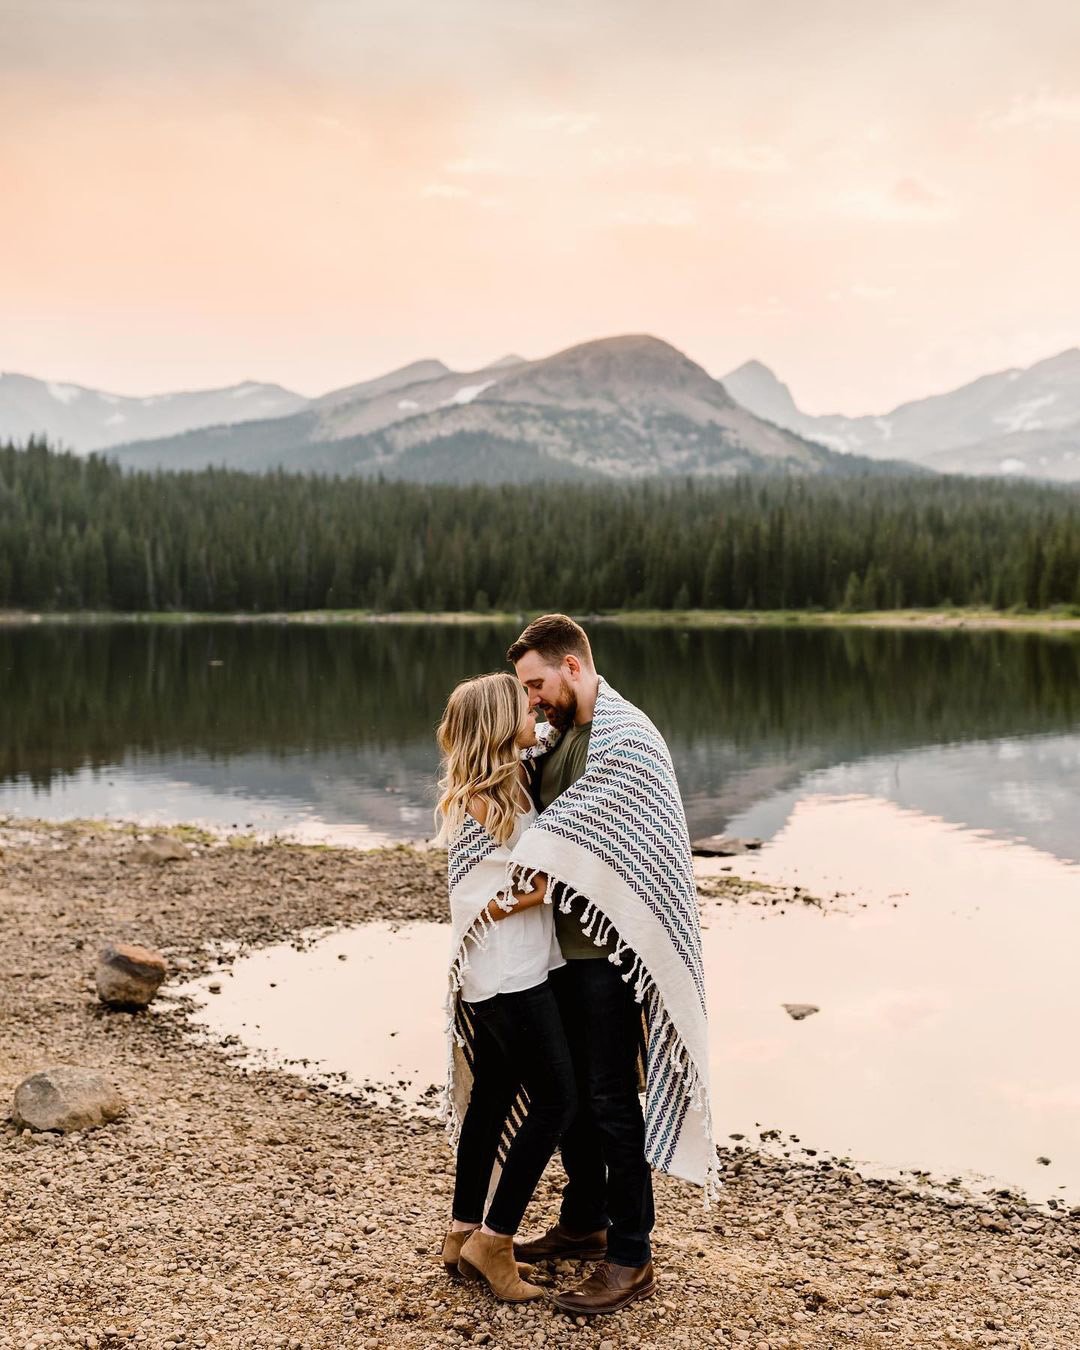 affordable honeymoon packages rocky mountains colorado view laurencasino